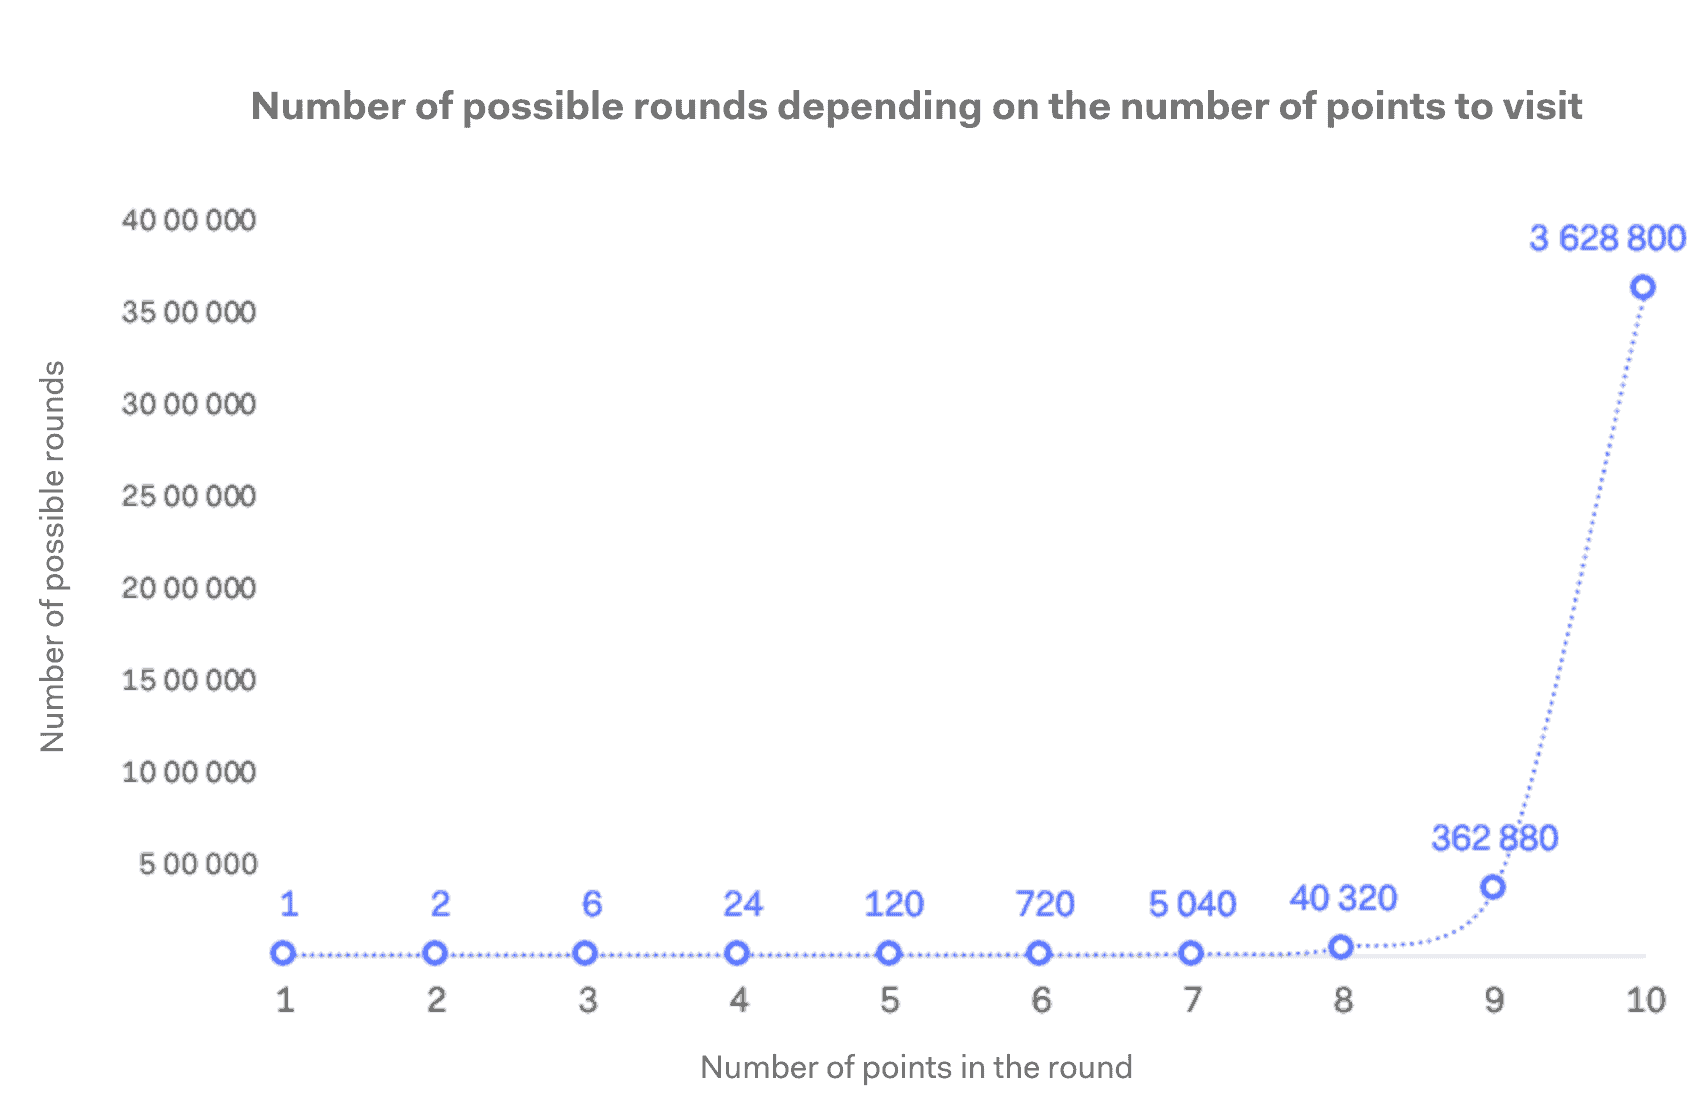 Number of possible rounds depending on the number of points to visit